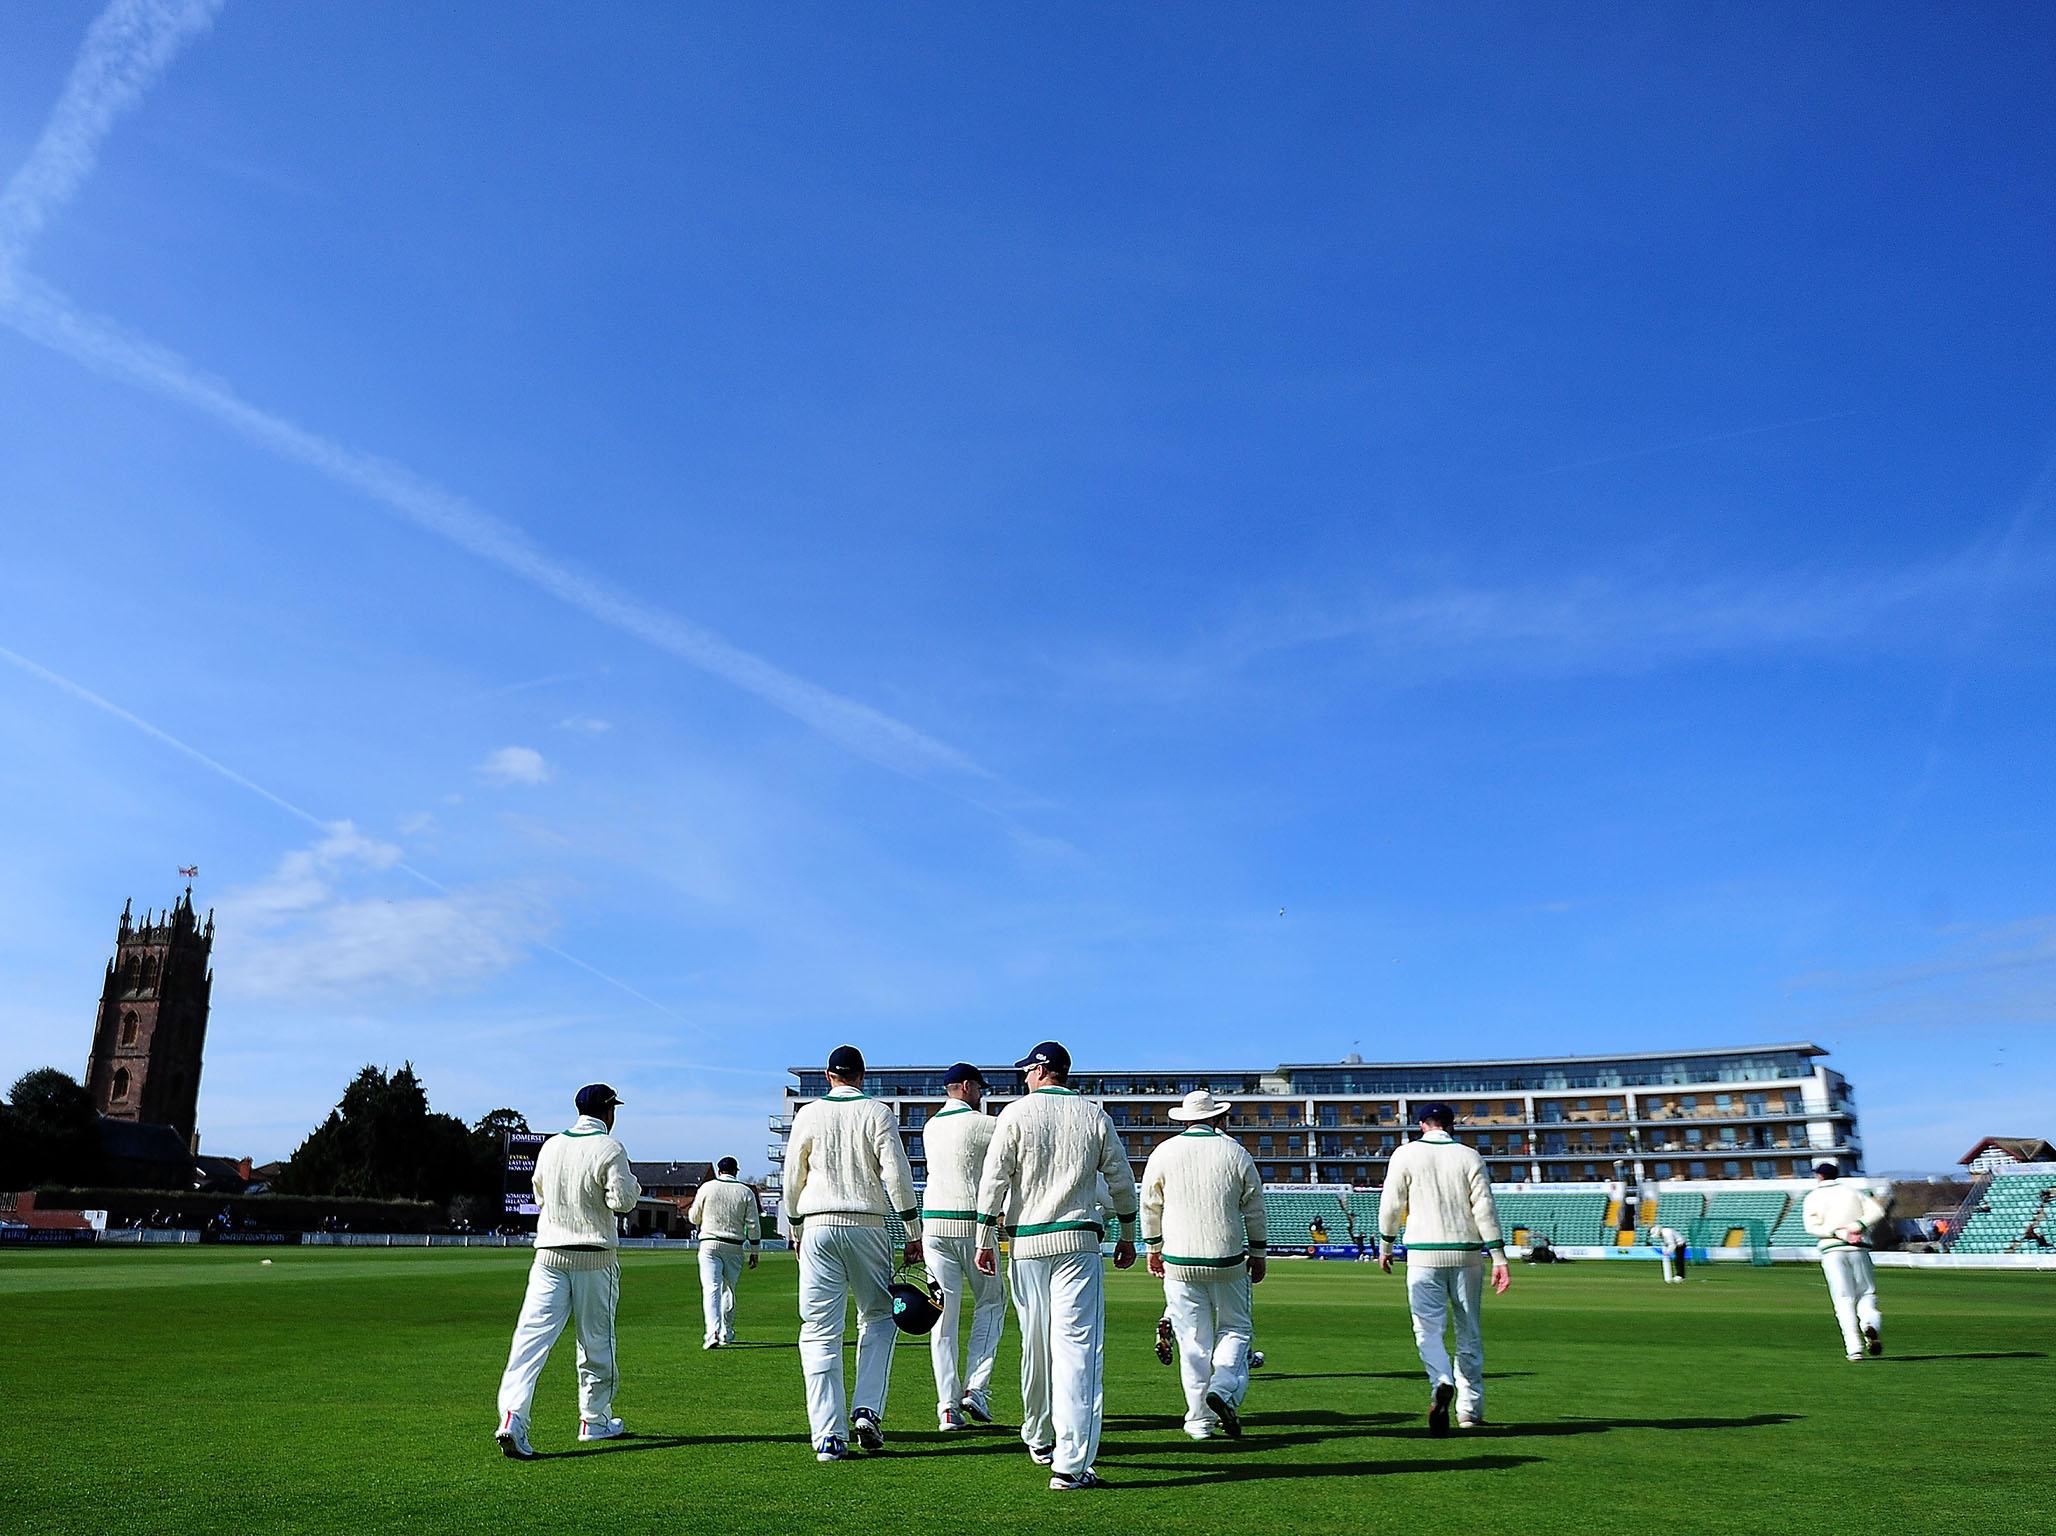 Ireland played Somerset in a friendly match last month at Taunton